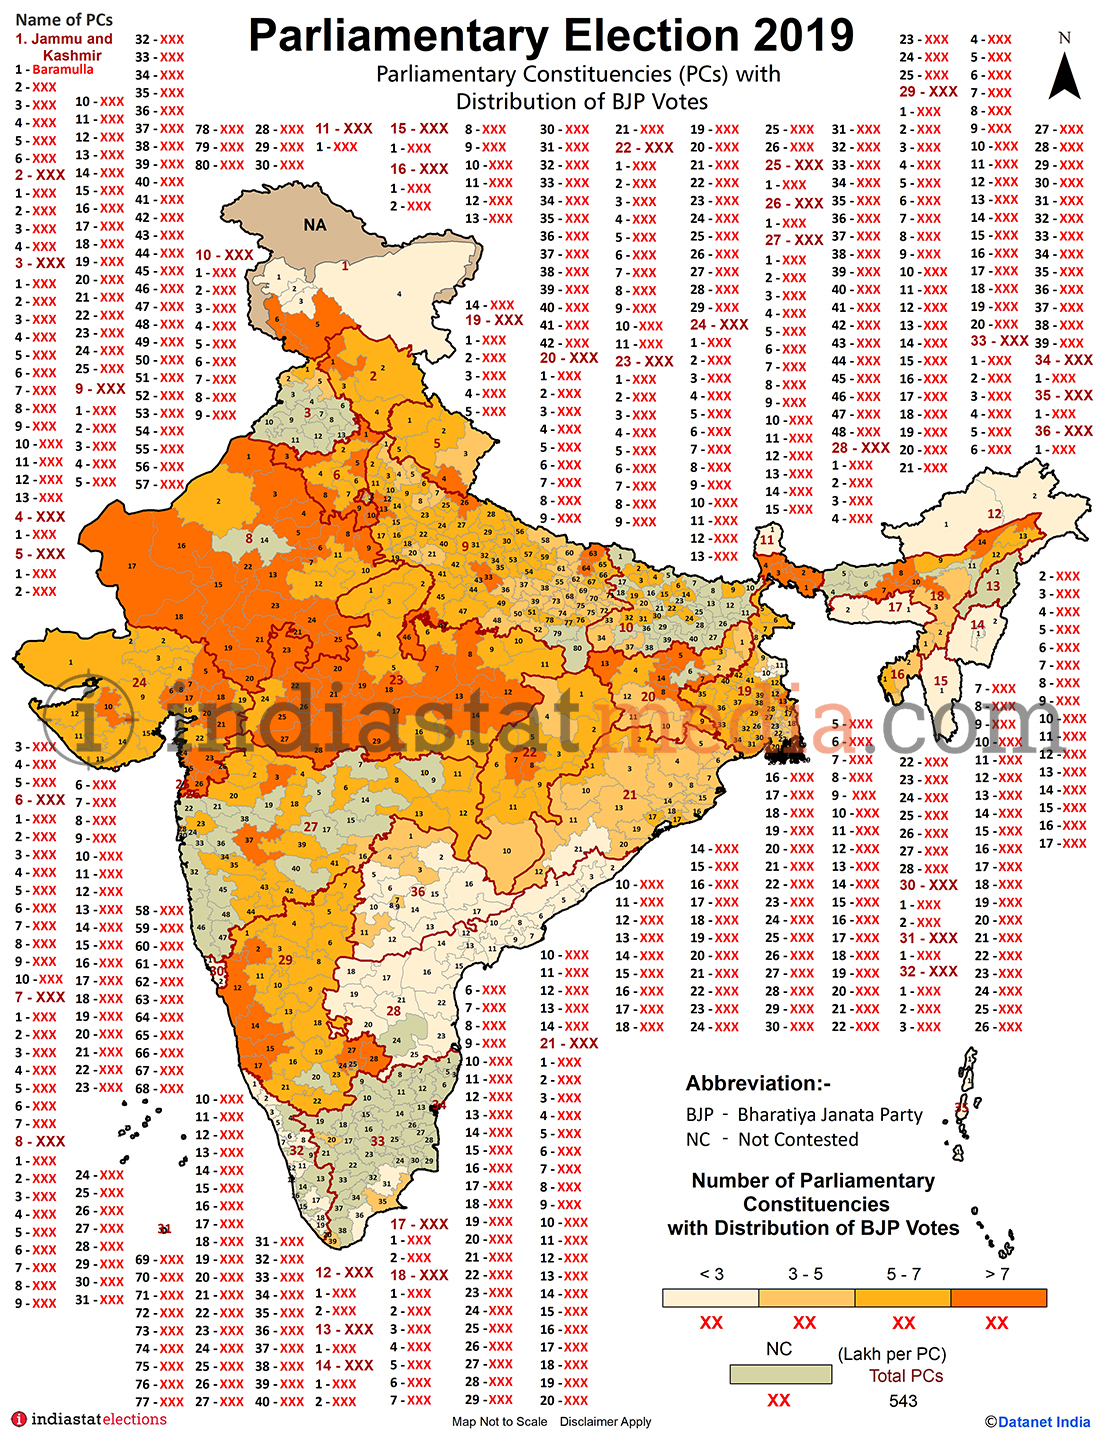 Distribution of BJP Votes by Parliamentary Constituencies in India (Parliamentary Election - 2019)